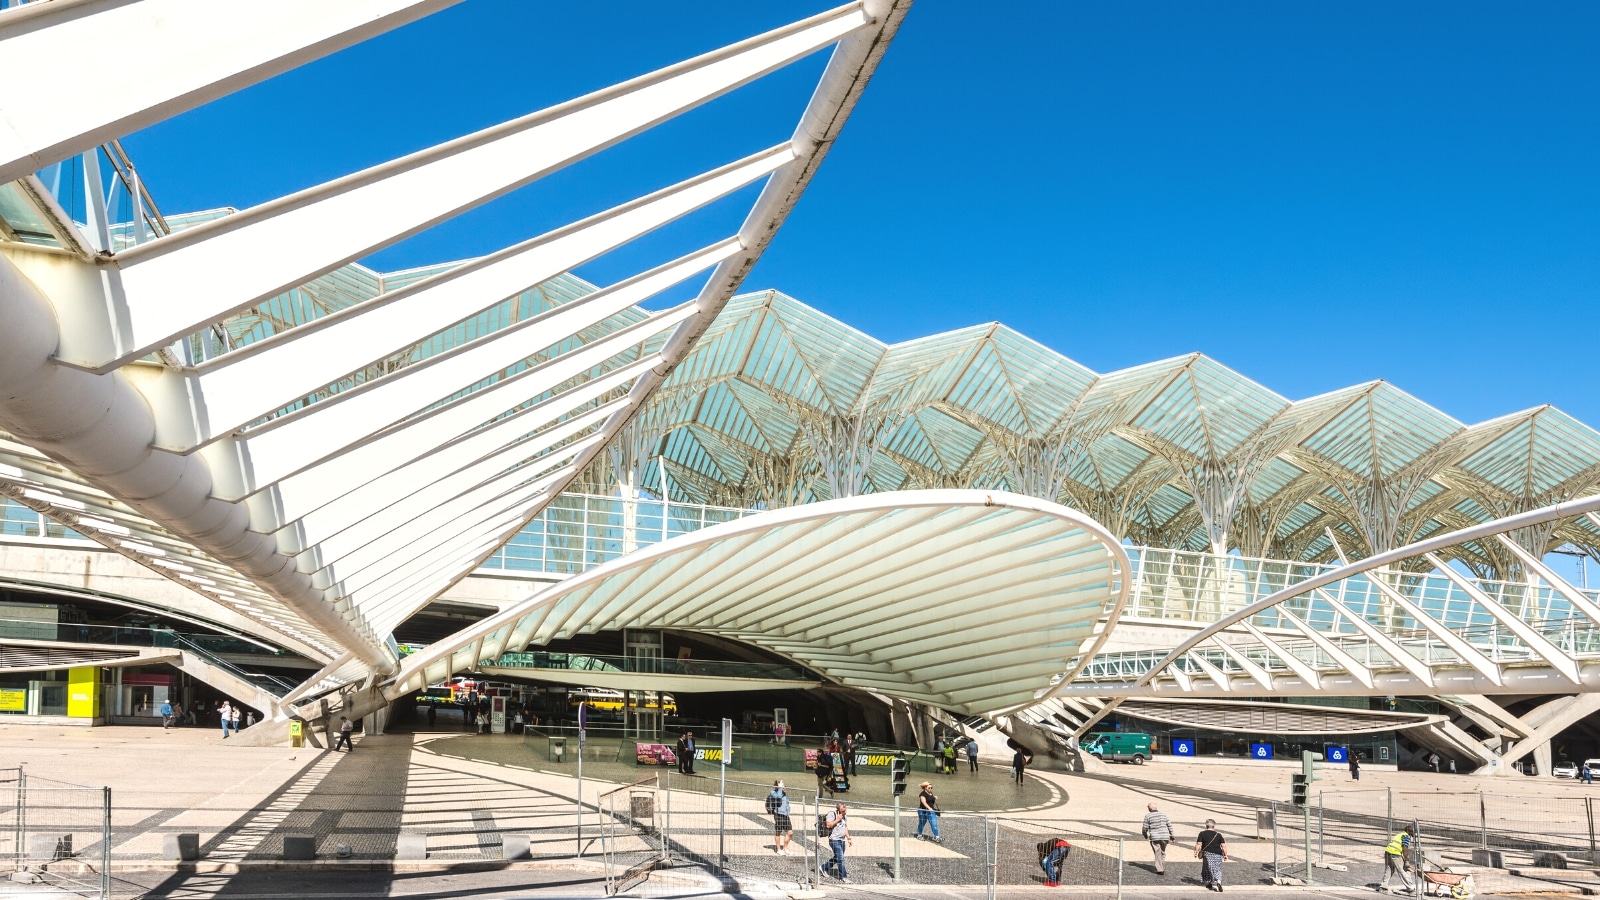 An image capturing Gare do Oriente in Lisbon, Portugal, from a distant viewpoint. The photograph depicts the modern architectural design of the transportation hub, featuring a complex structure with distinctive geometric patterns. Several people are observed in the vicinity.